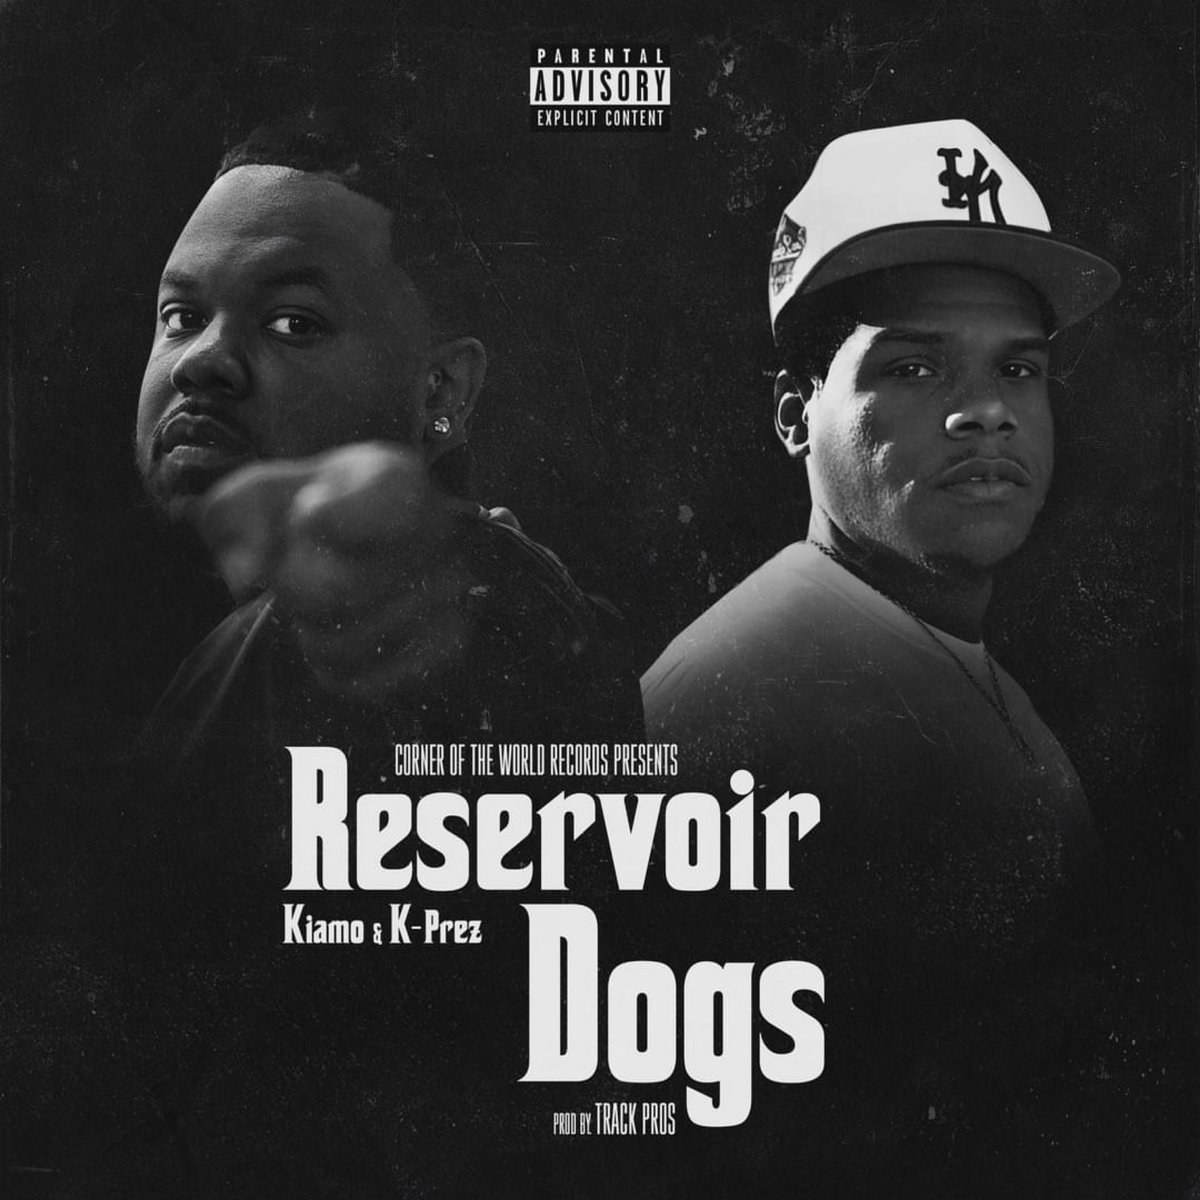 New single this Friday Nov 3rd Twitter sees it first 🔥 “Reservoir Dogs” featuring @KPrezTho Pre-save - instabio.cc/Kiamoworld973